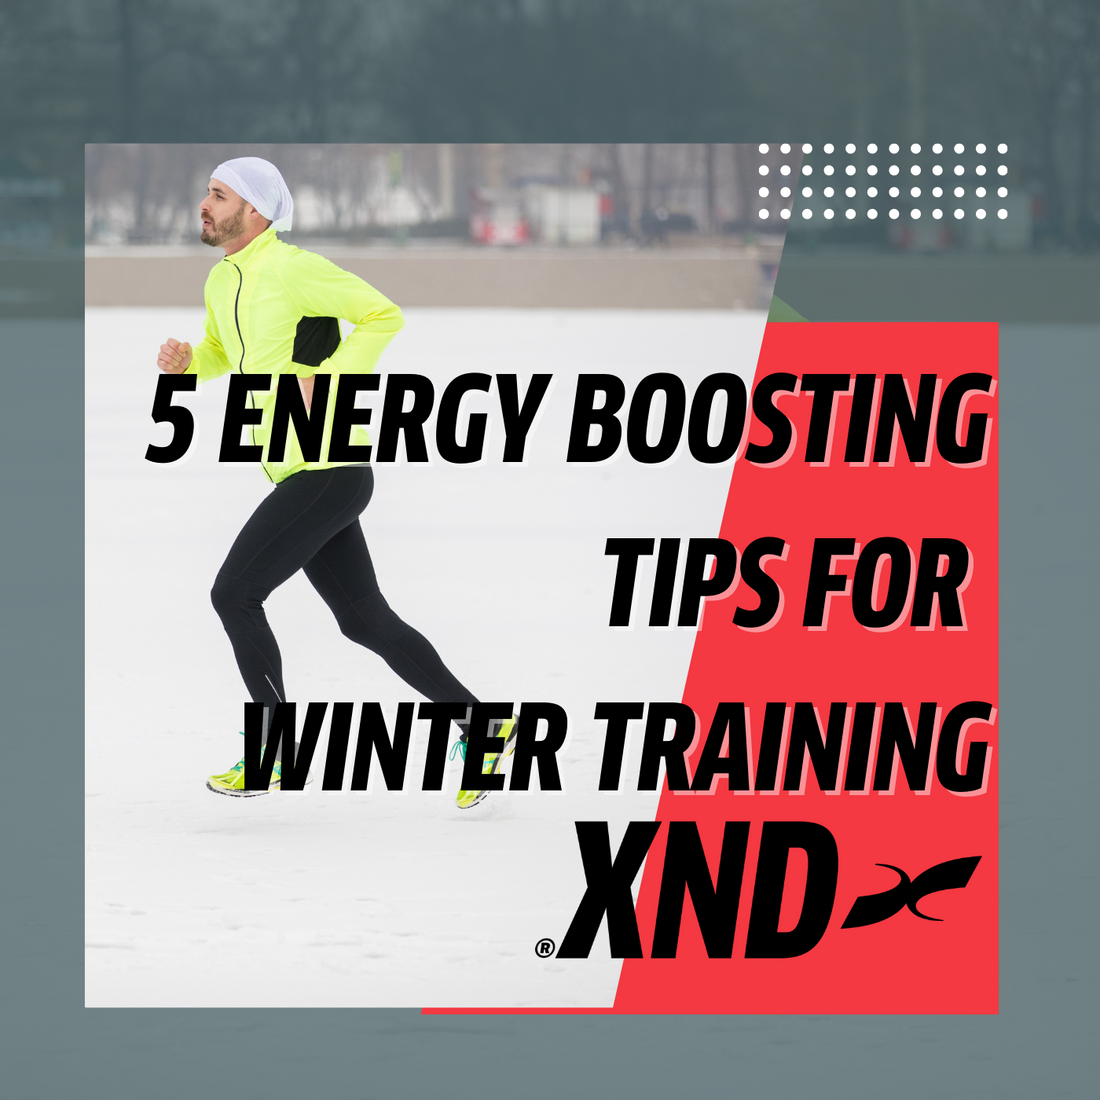 5 Energy boosting tips for winter training